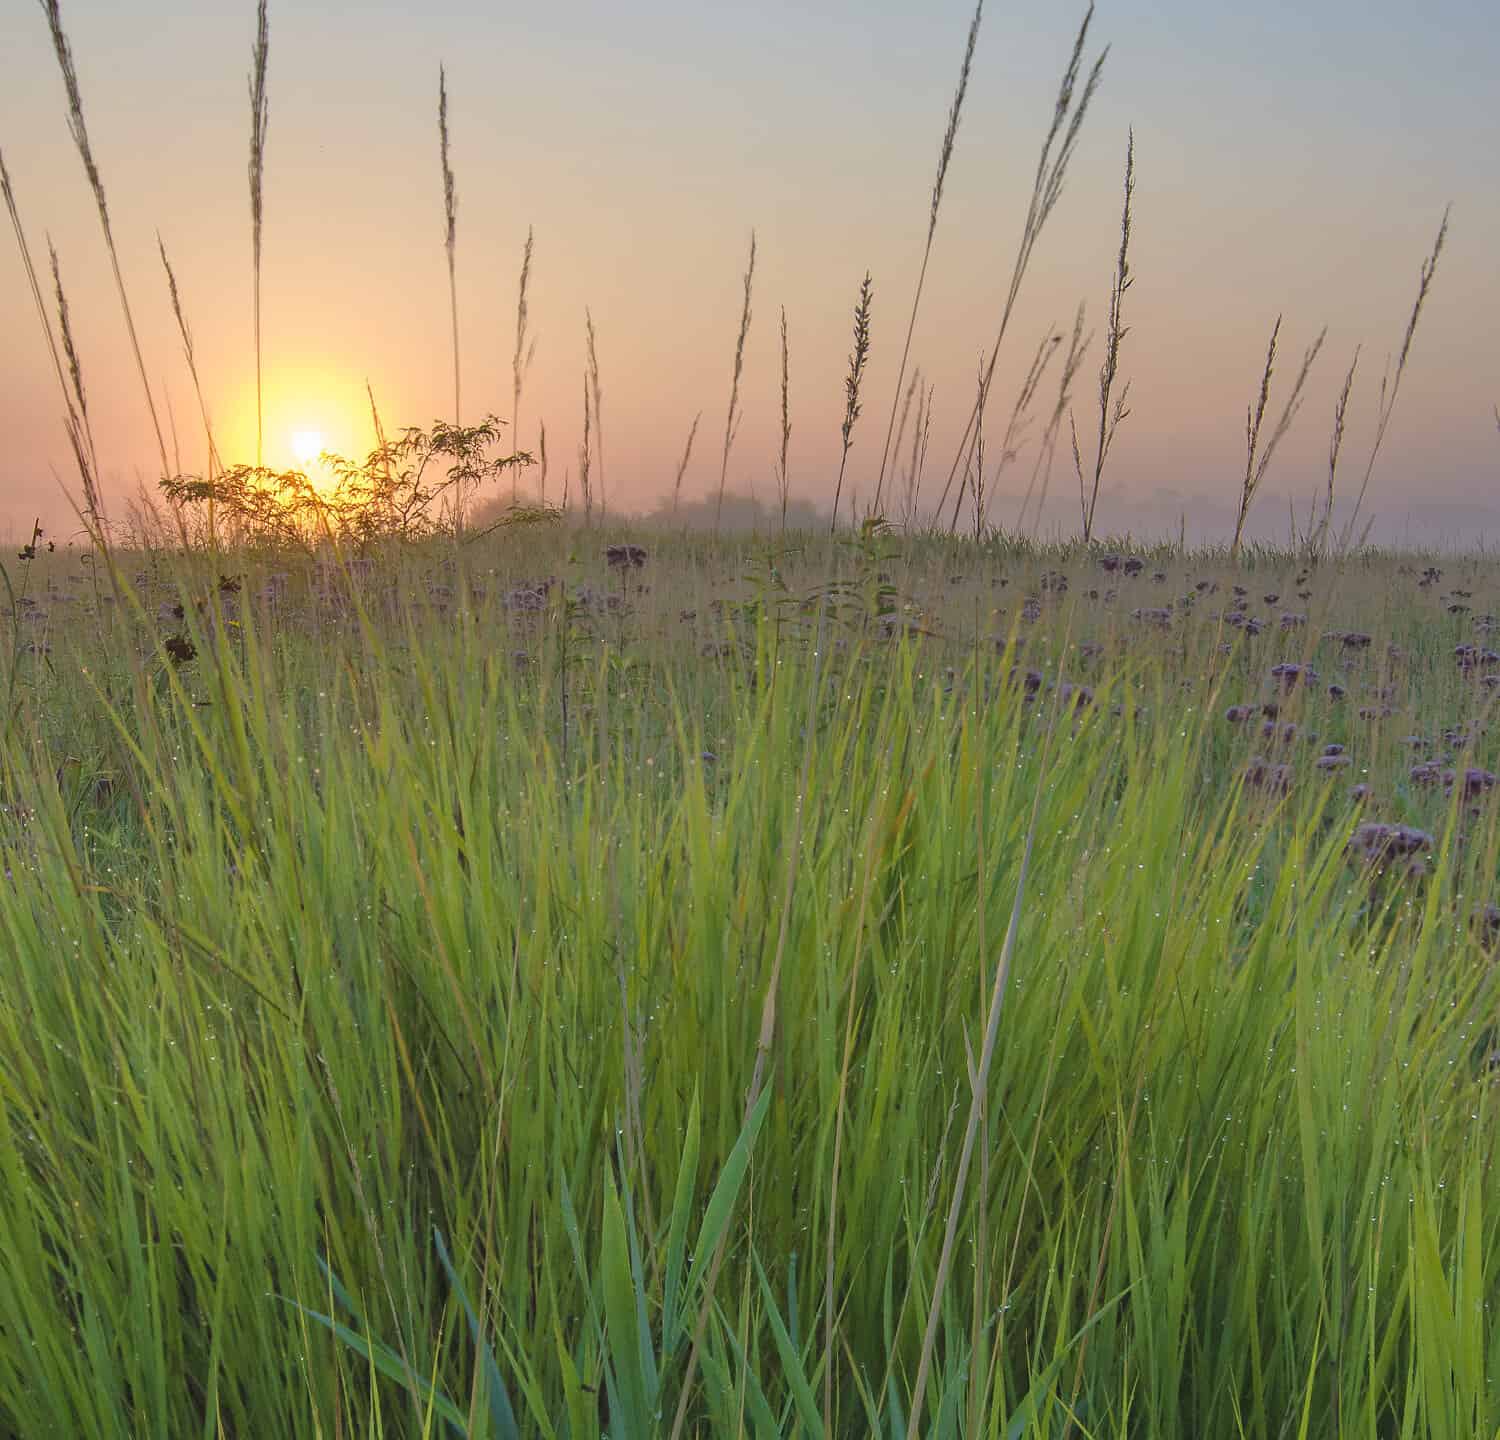 The sunrises over the prairie where Big Bluestem Grass grows in profusion at Springbrook Prairie Forest Preserve in DuPage County, Illinois